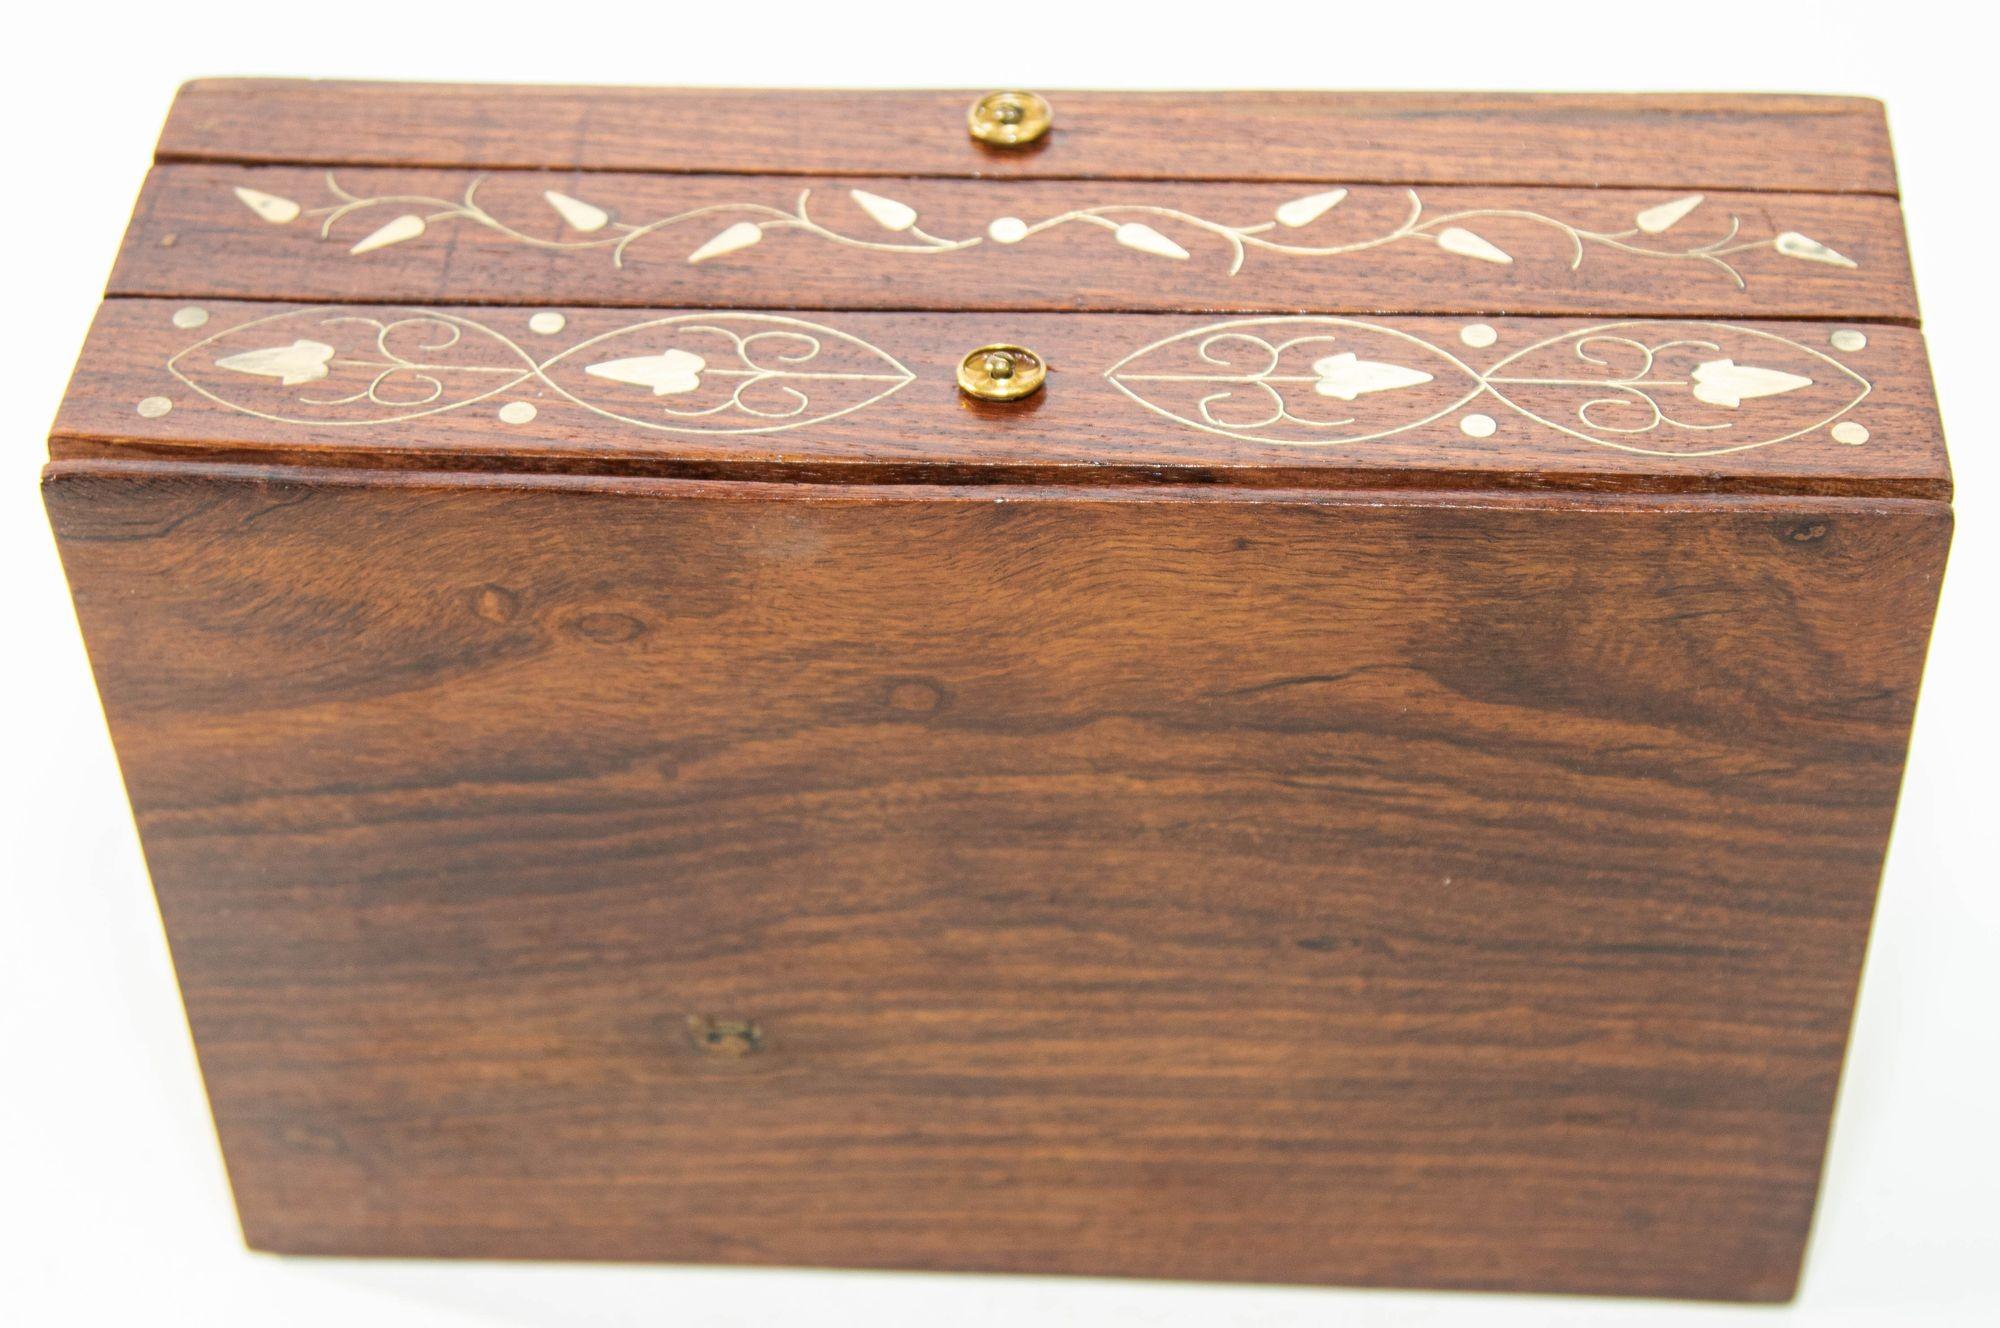 1940s Victorian Anglo Indian Box in Brass and Bone Inlaid 4